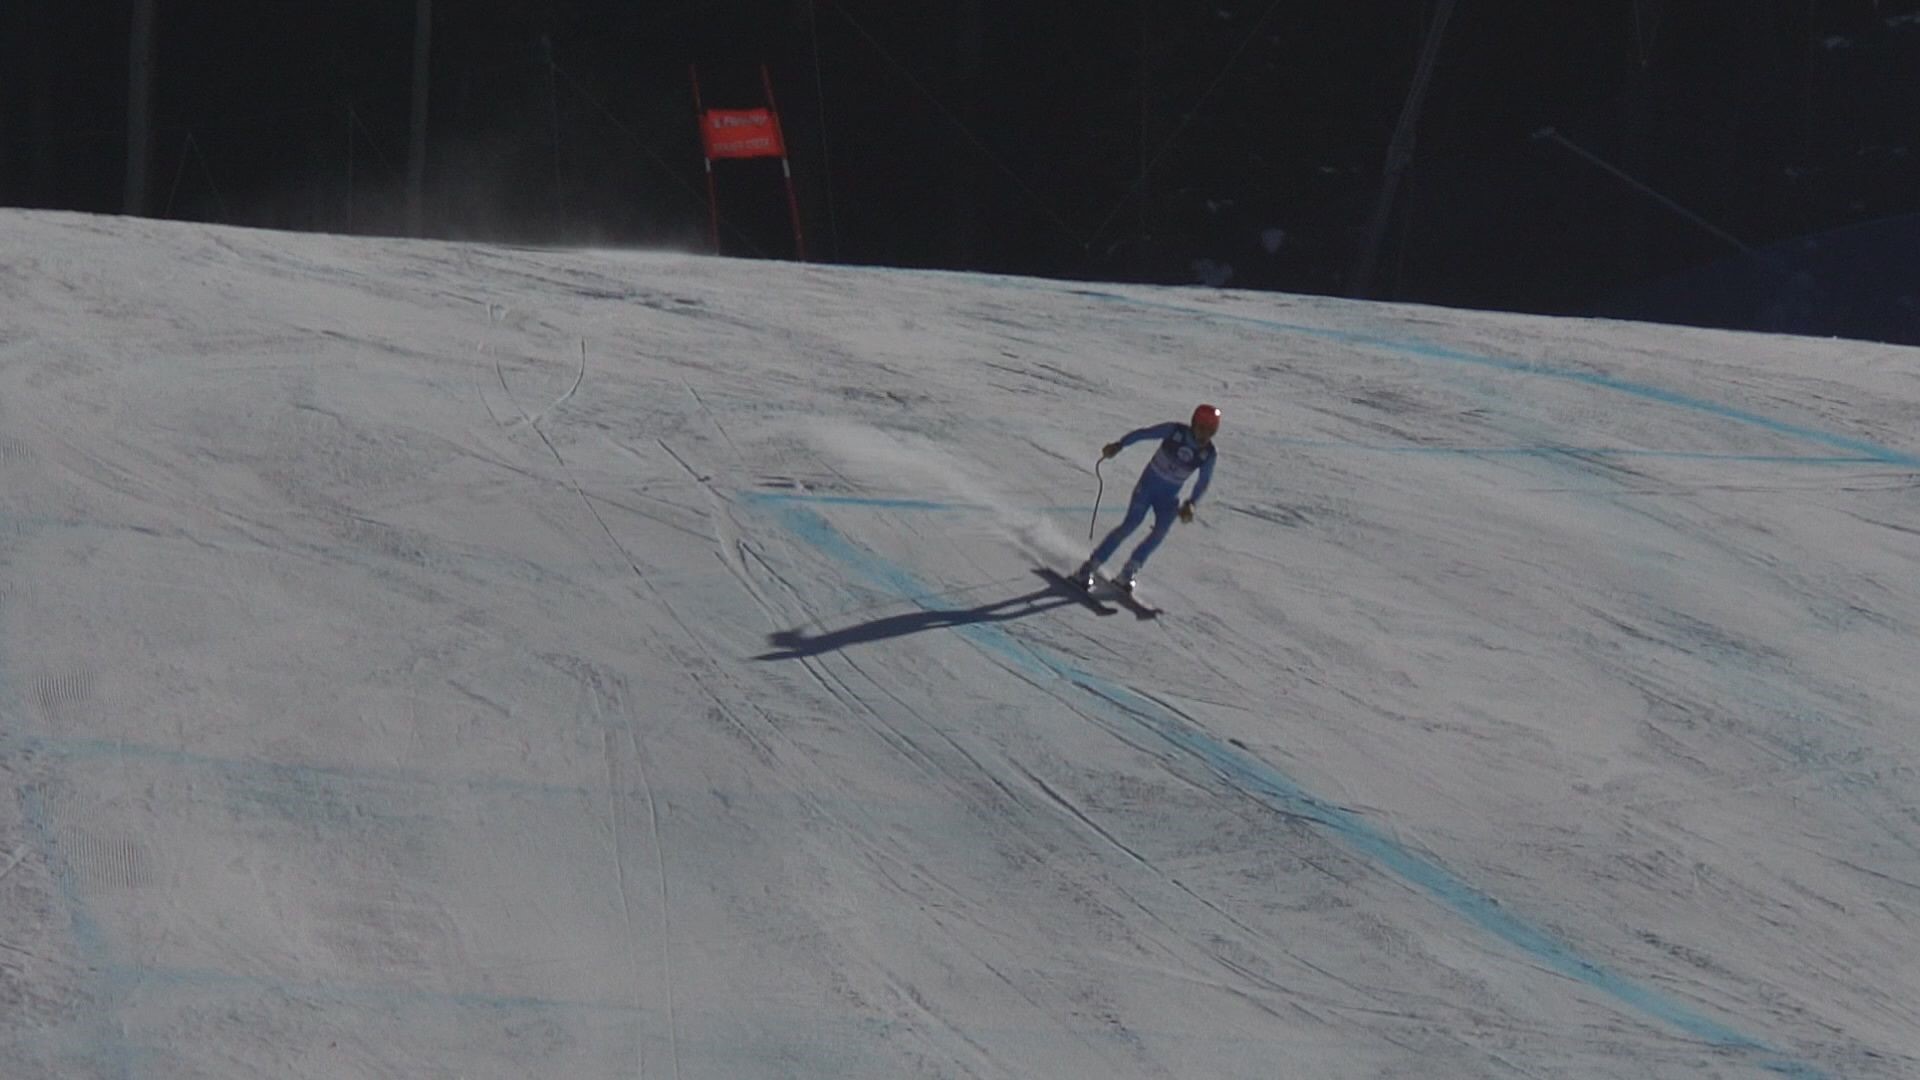 US skiers race with Kevlar-lined suits at the Winter Olympics 9news